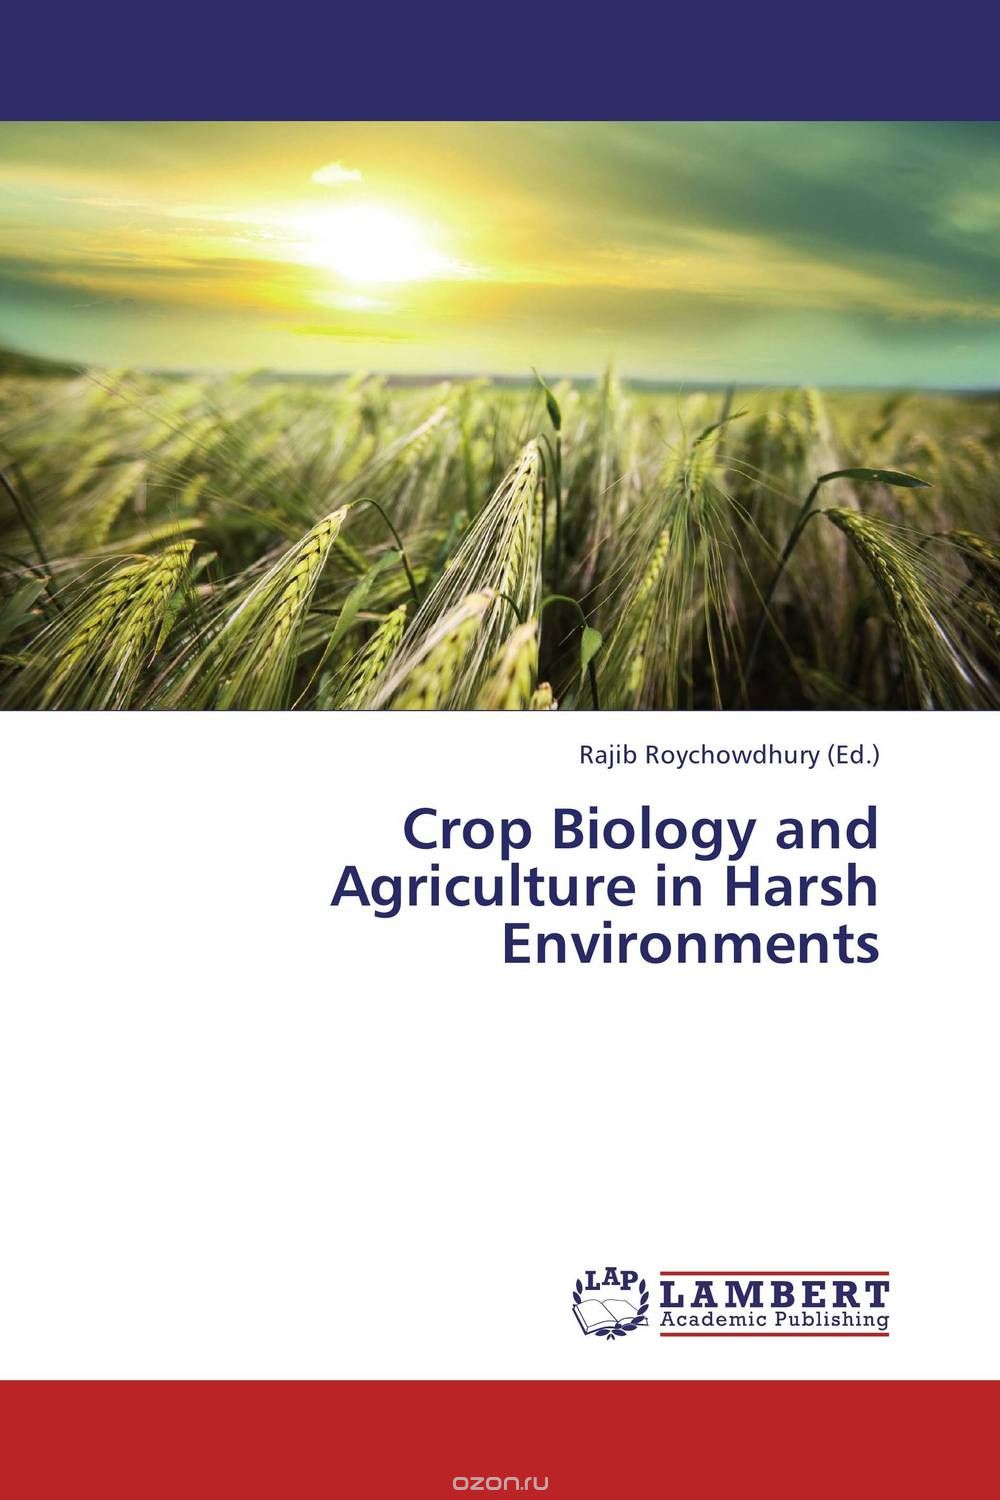 Crop Biology and Agriculture in Harsh Environments